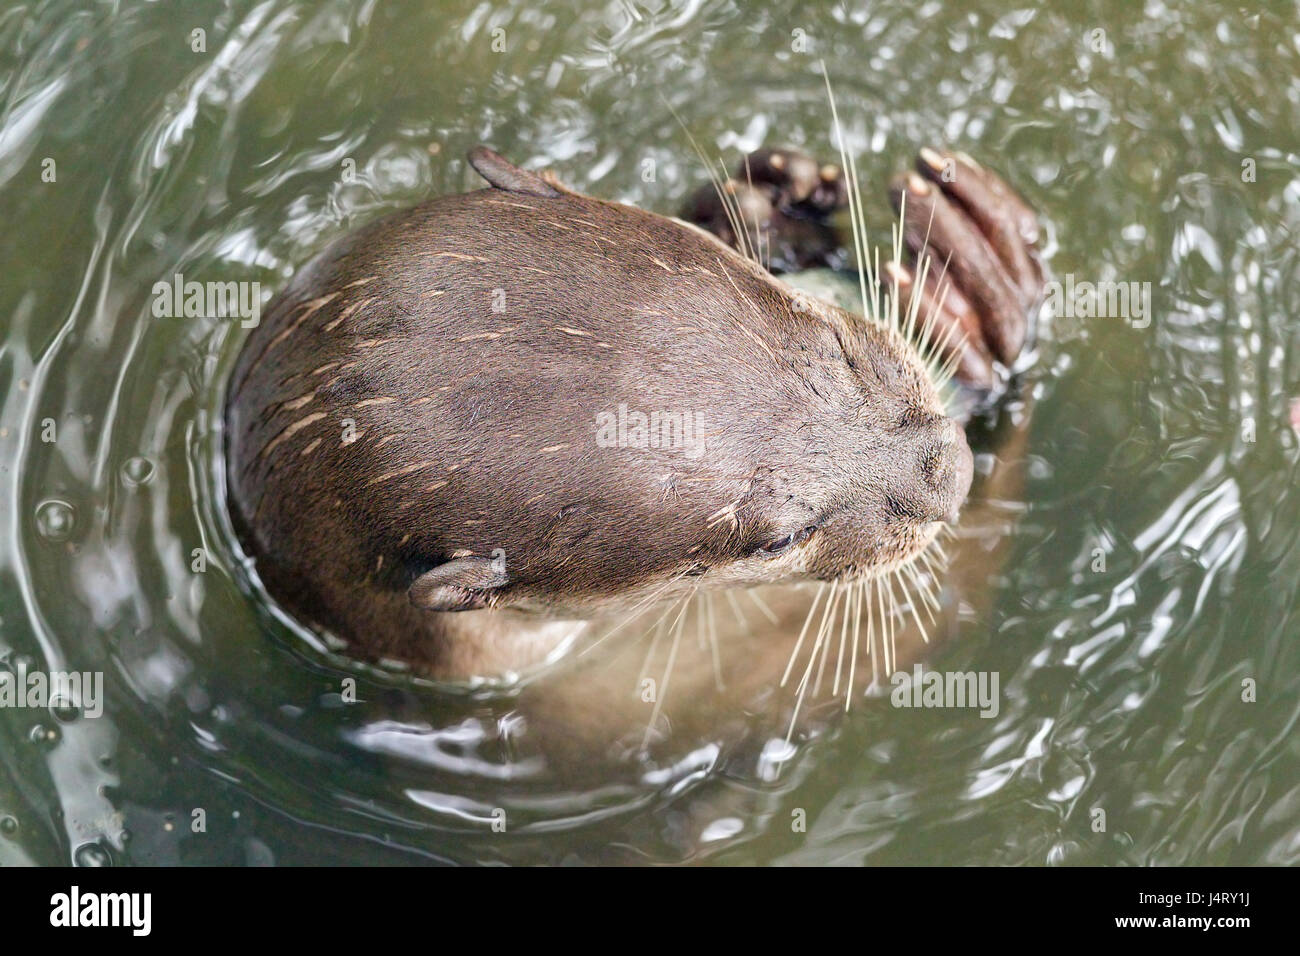 Smooth-coated otter (Lutrogale perspicillata) eating freshly caught fish in a mangrove stream, Singapore Stock Photo